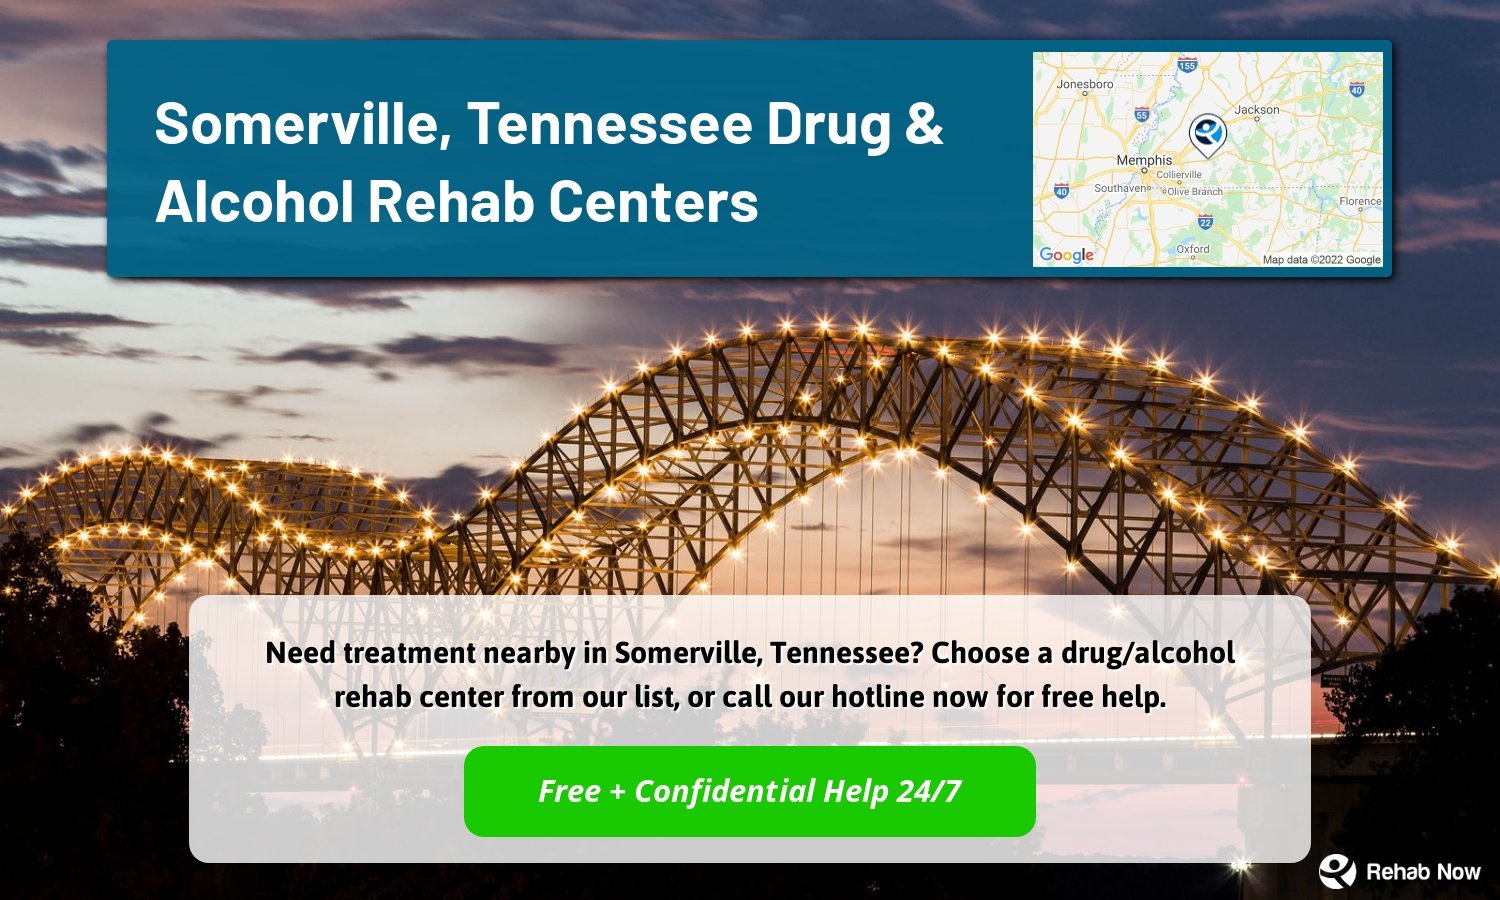 Need treatment nearby in Somerville, Tennessee? Choose a drug/alcohol rehab center from our list, or call our hotline now for free help.